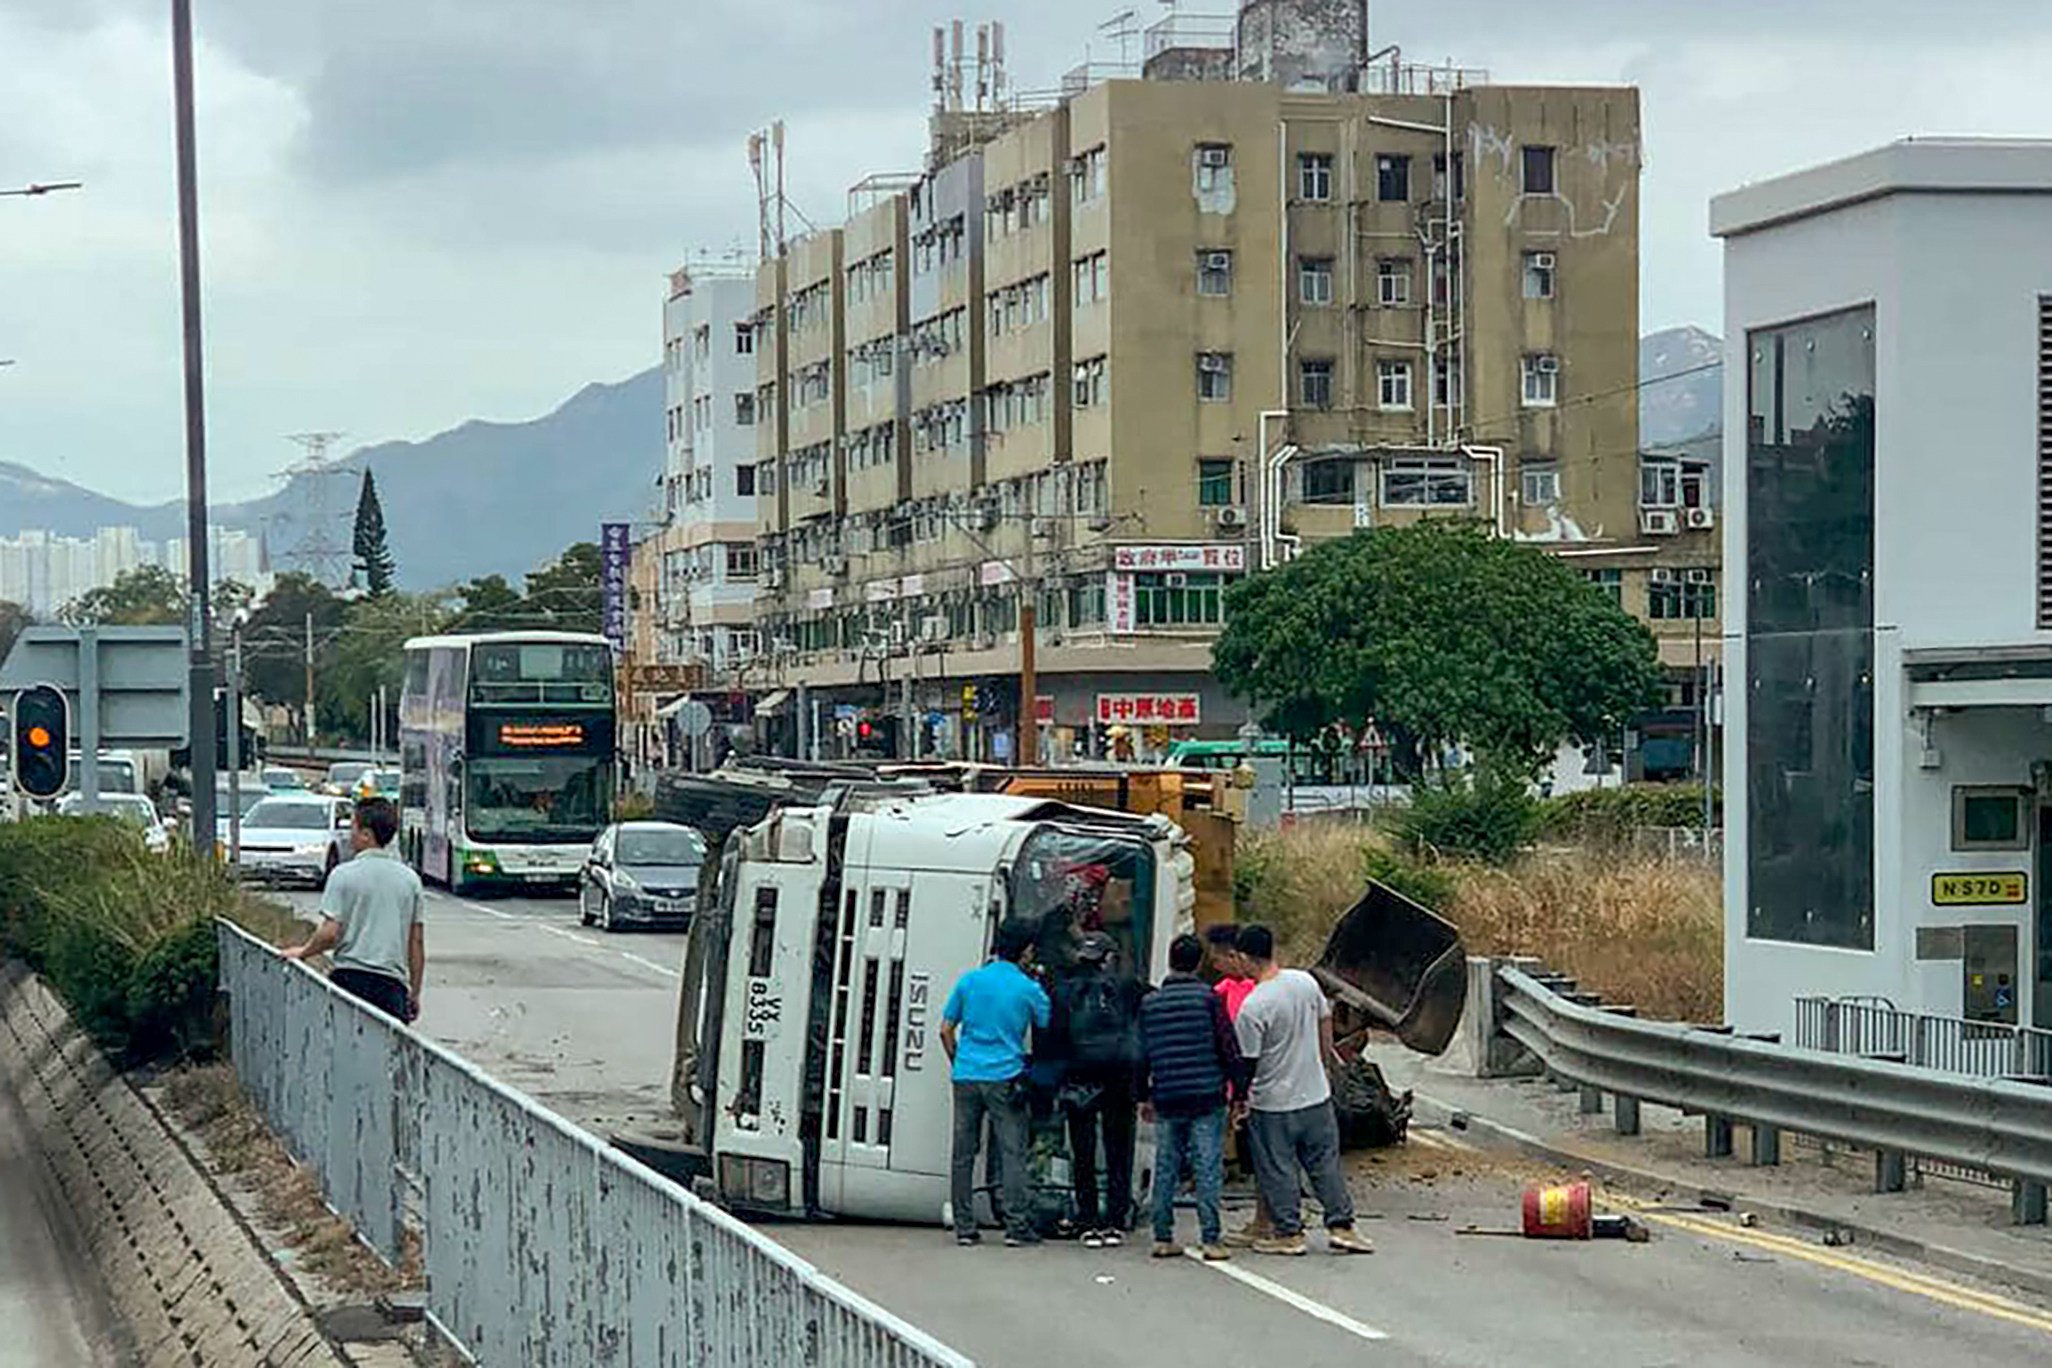 Passers-by mount a rescue bid after a truck hit a central divider and overturned, trapping its driver inside. Photo: Facebook/@車cam L